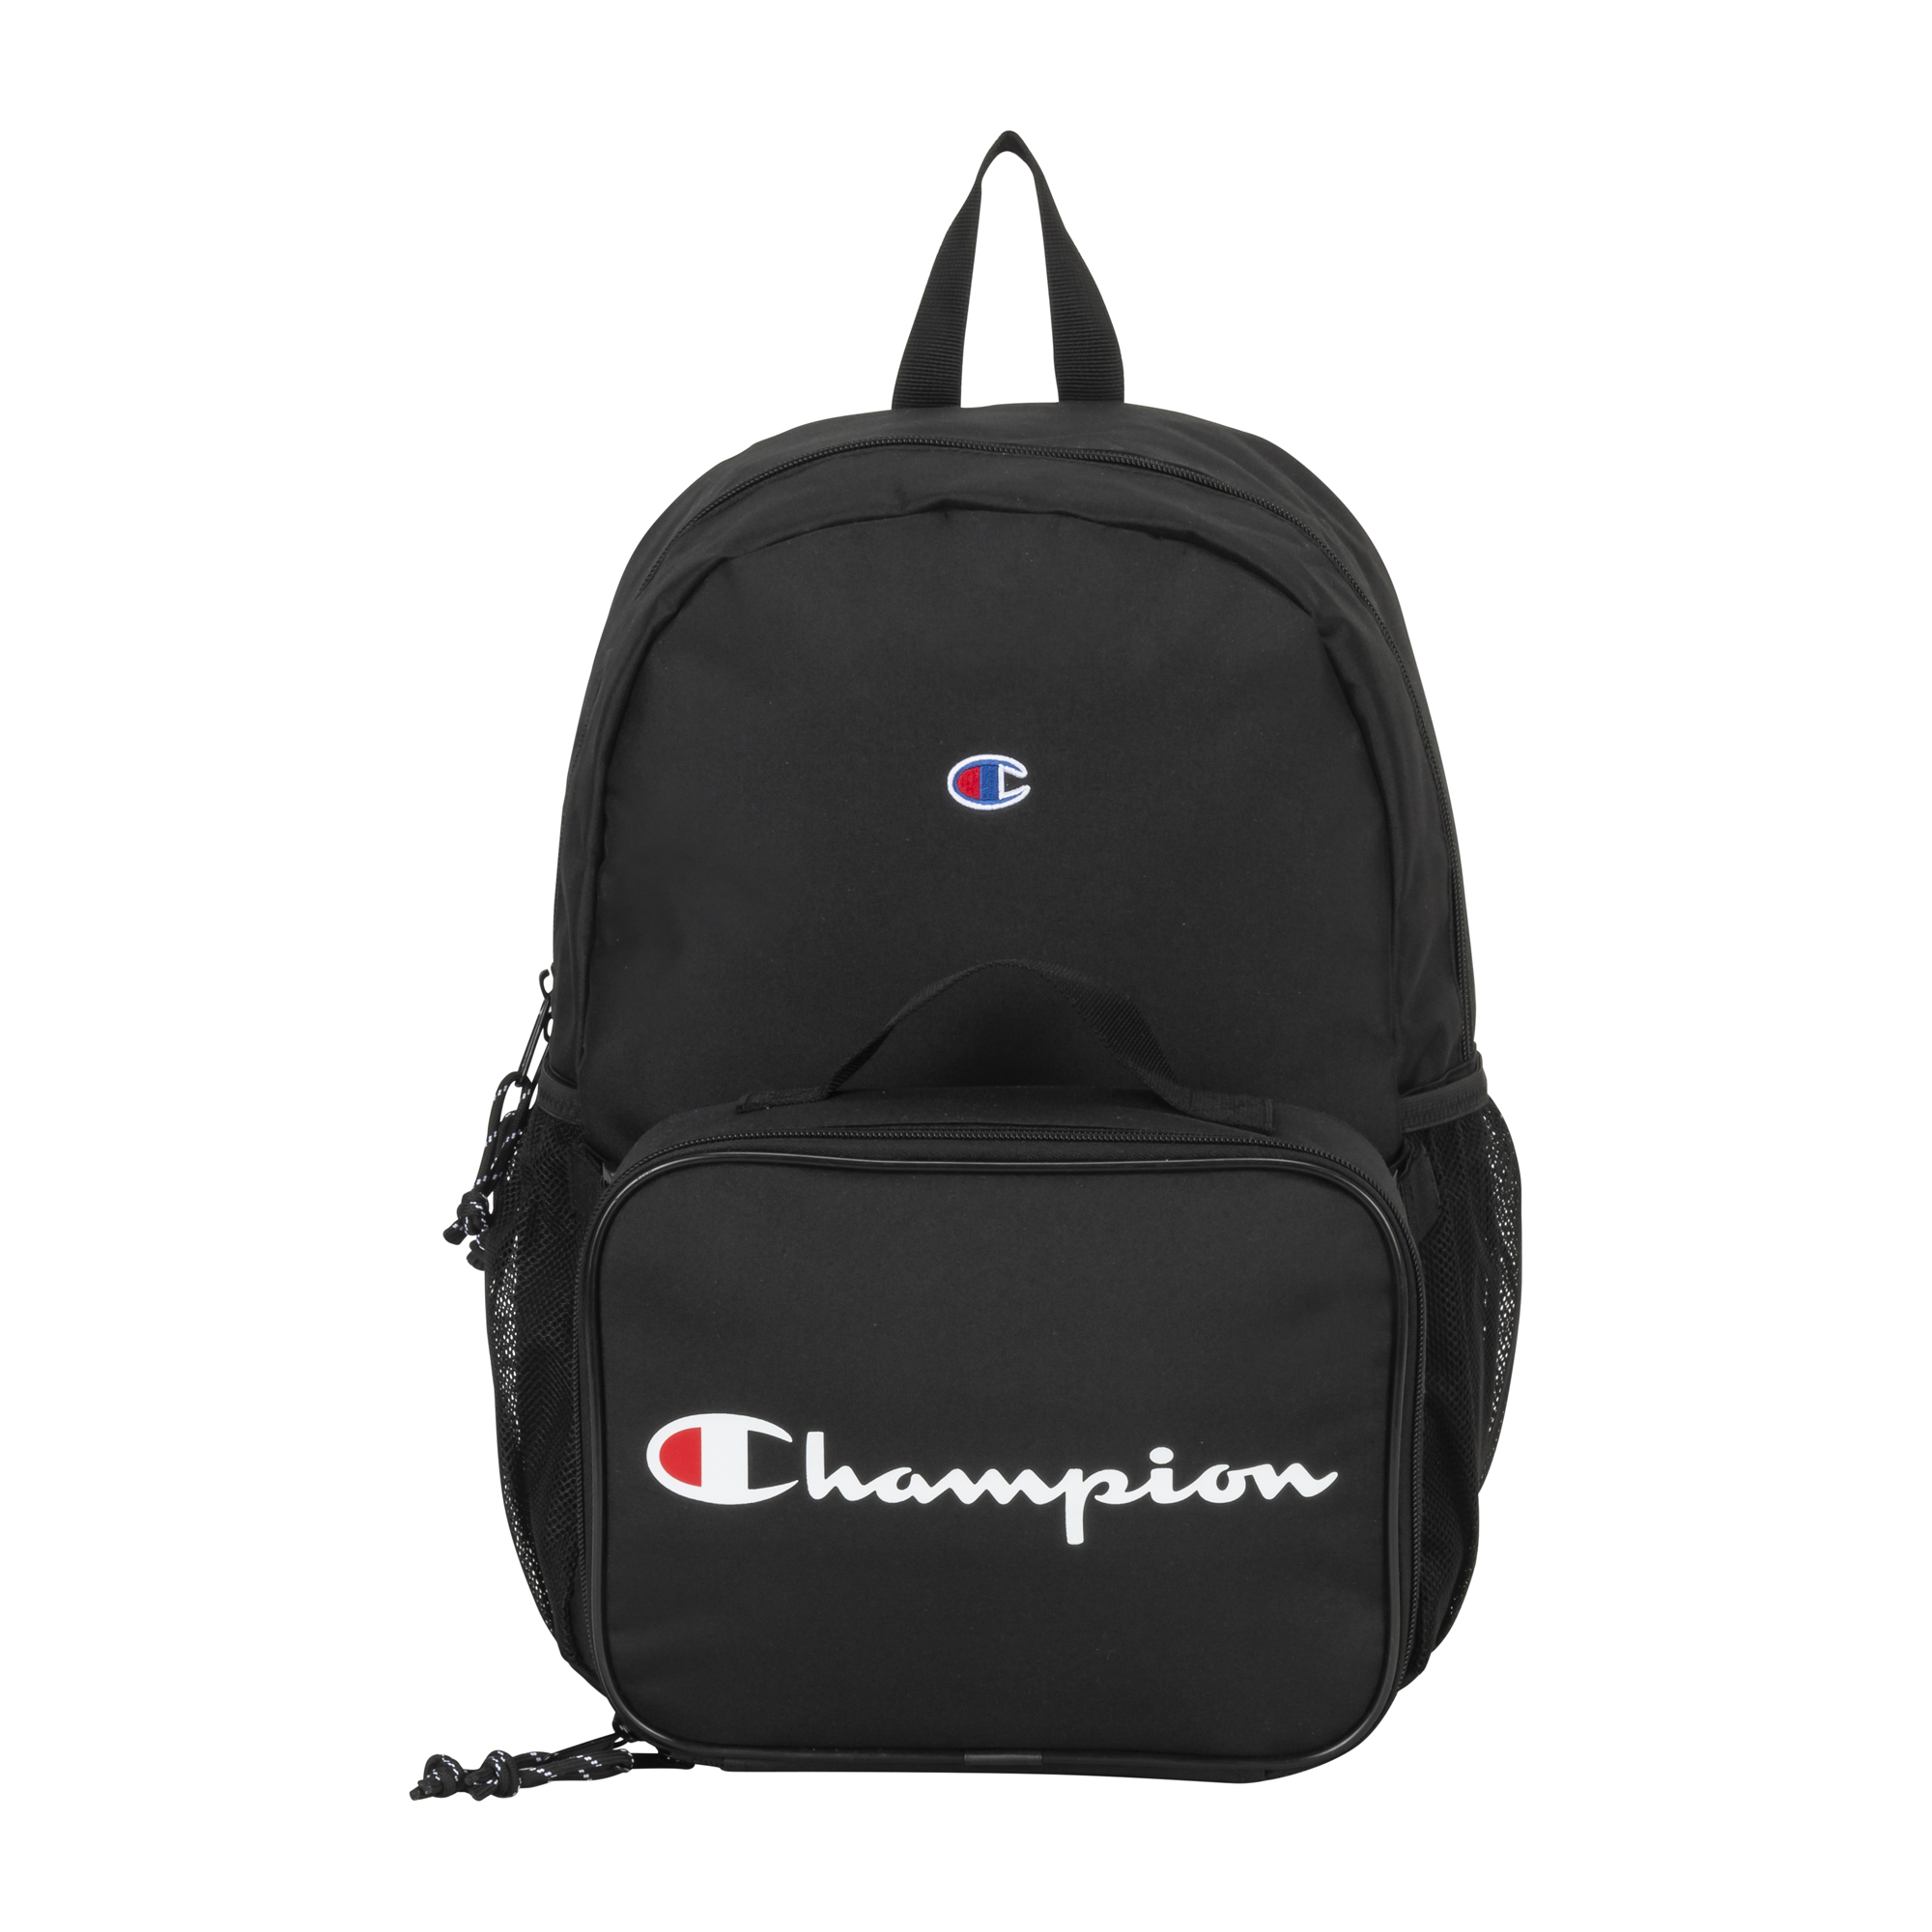 Champion Munch Backpack Lunch Kit Combo - image 2 of 3